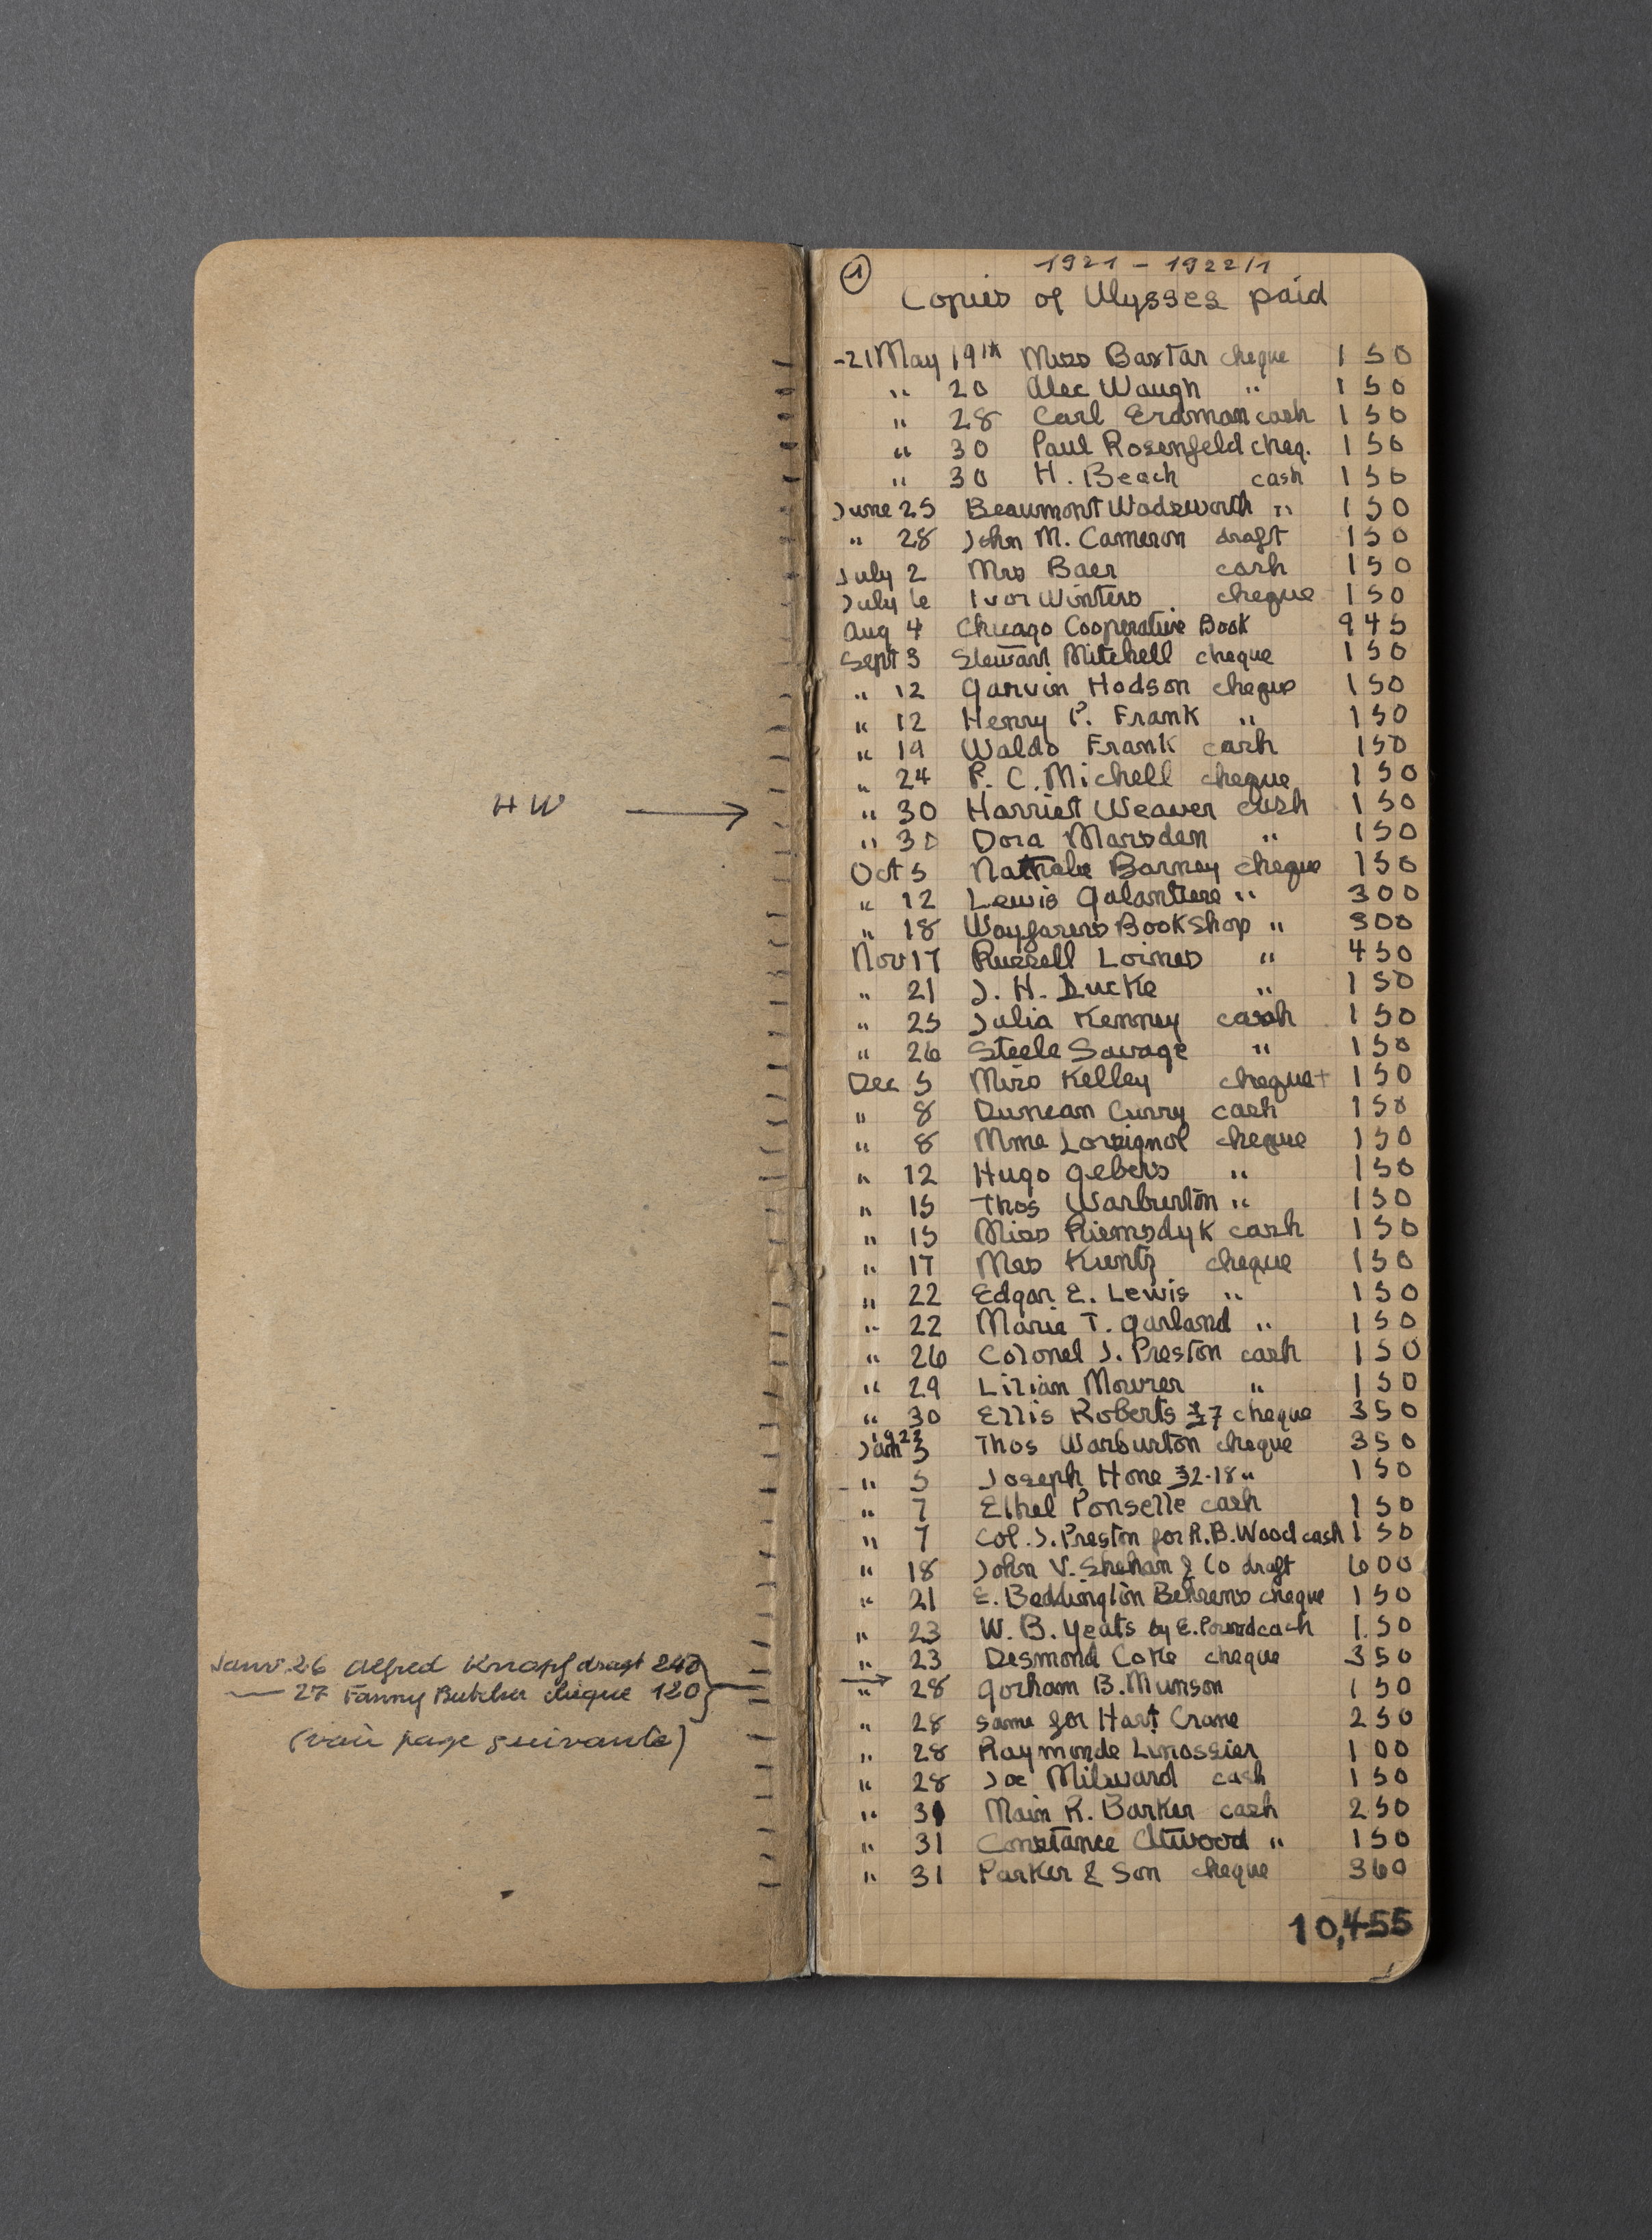 Notebook containing handwritten names and amounts paid for subscribers to Ulysses